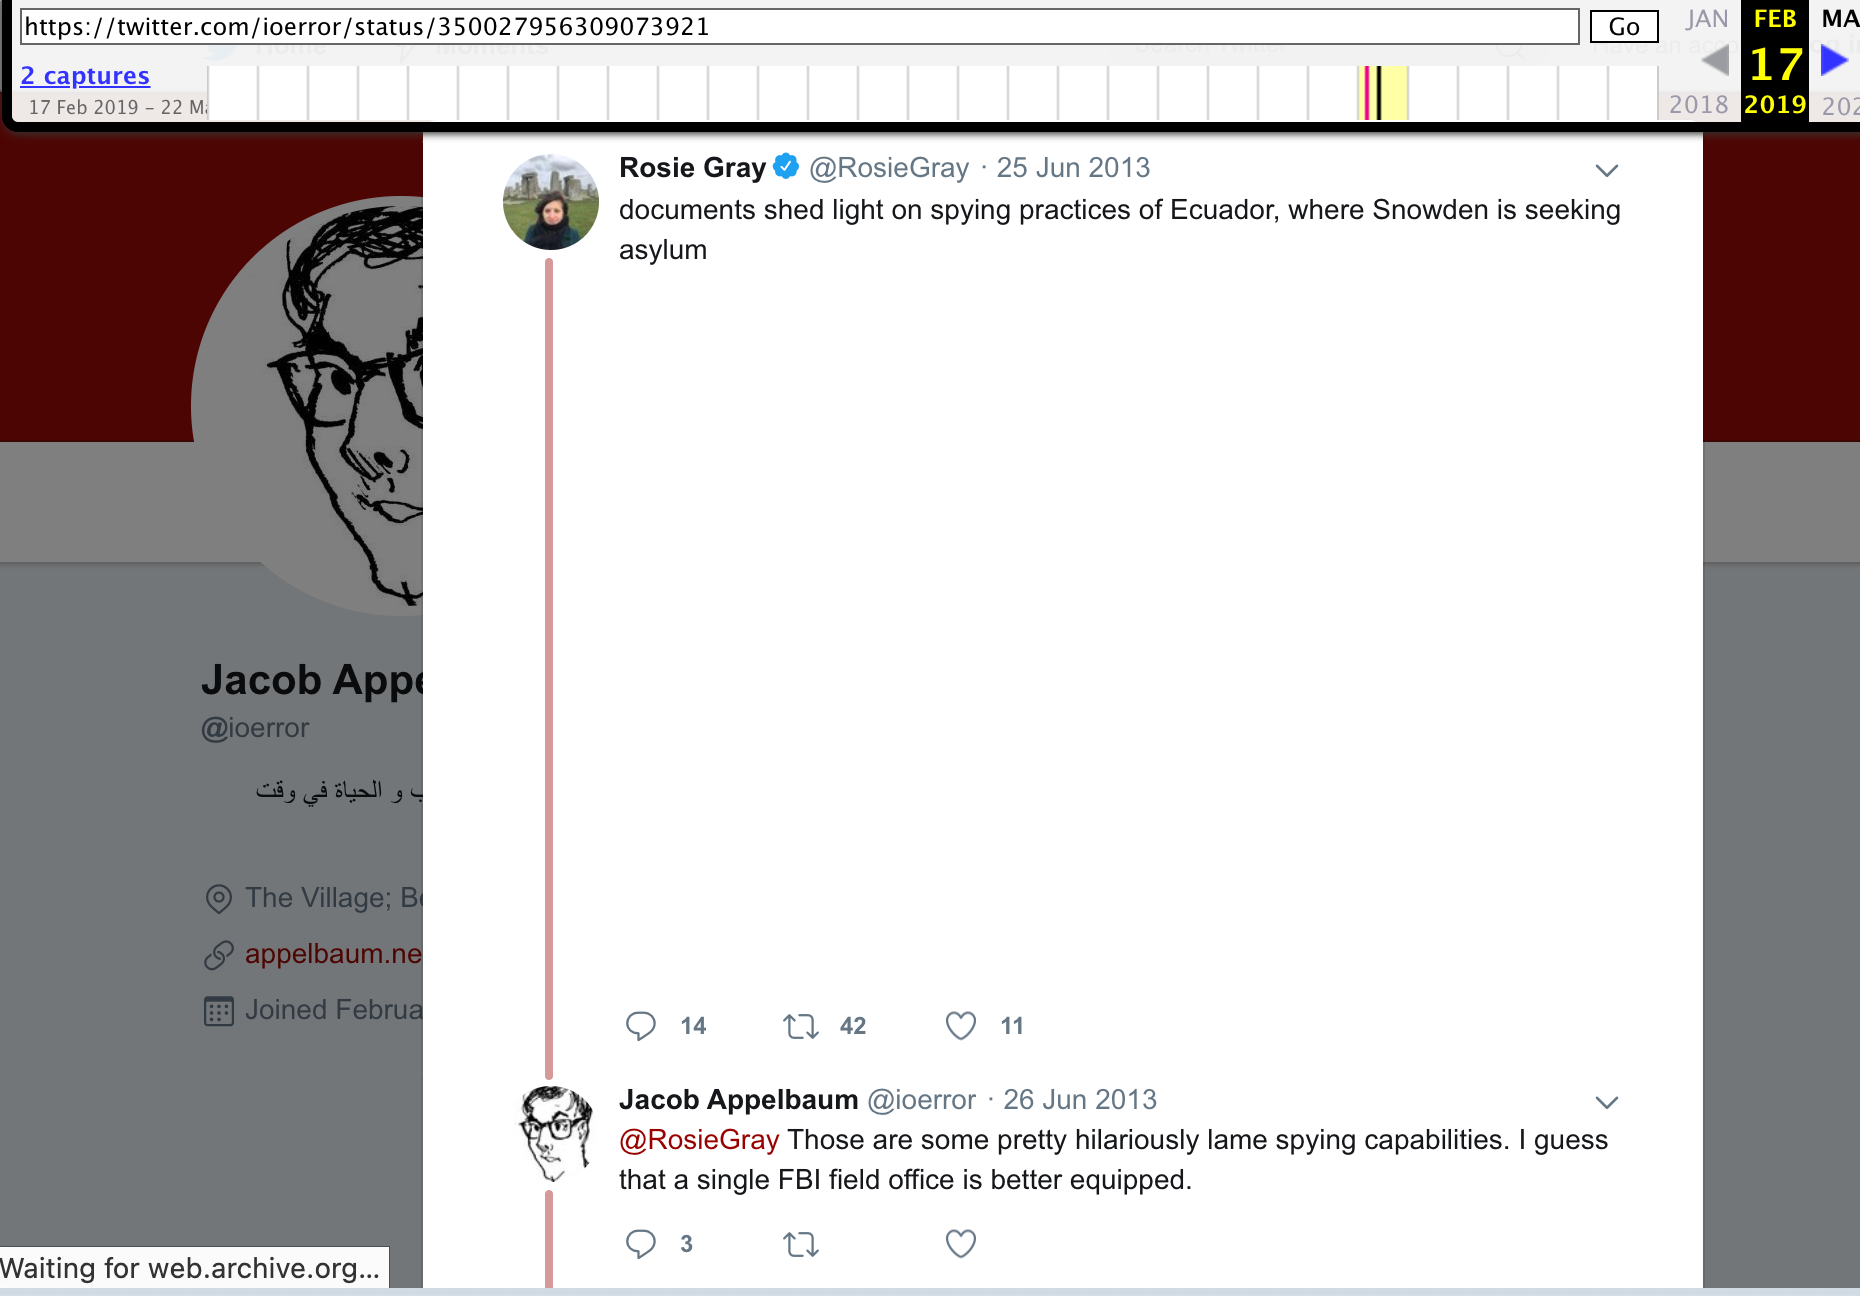 Archive.org snapshot of deleted tweet from @RosieGray on 25 June 2013 saying: "documents shed light on spying practices of Ecuador, where Snowden is seeking asylum." Reply by Jacbo Appelbaum @ioerror on June 26 2013: "Those are some pretty hilariously lame spying capabilities. I guess that a single FBI field office is better equipped."